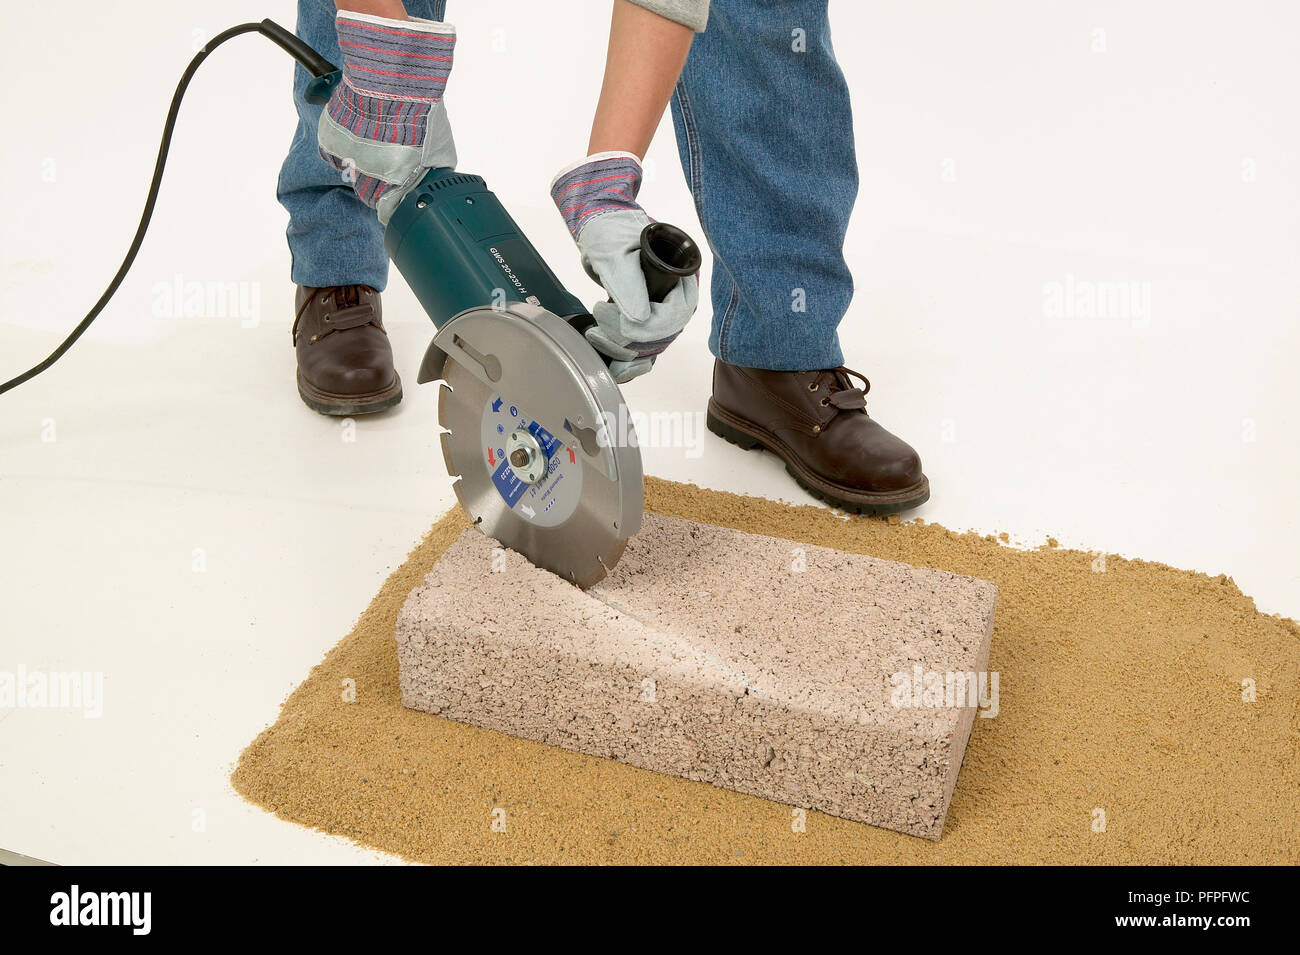 Using an angle grinder to cut a block diagonally Stock Photo - Alamy